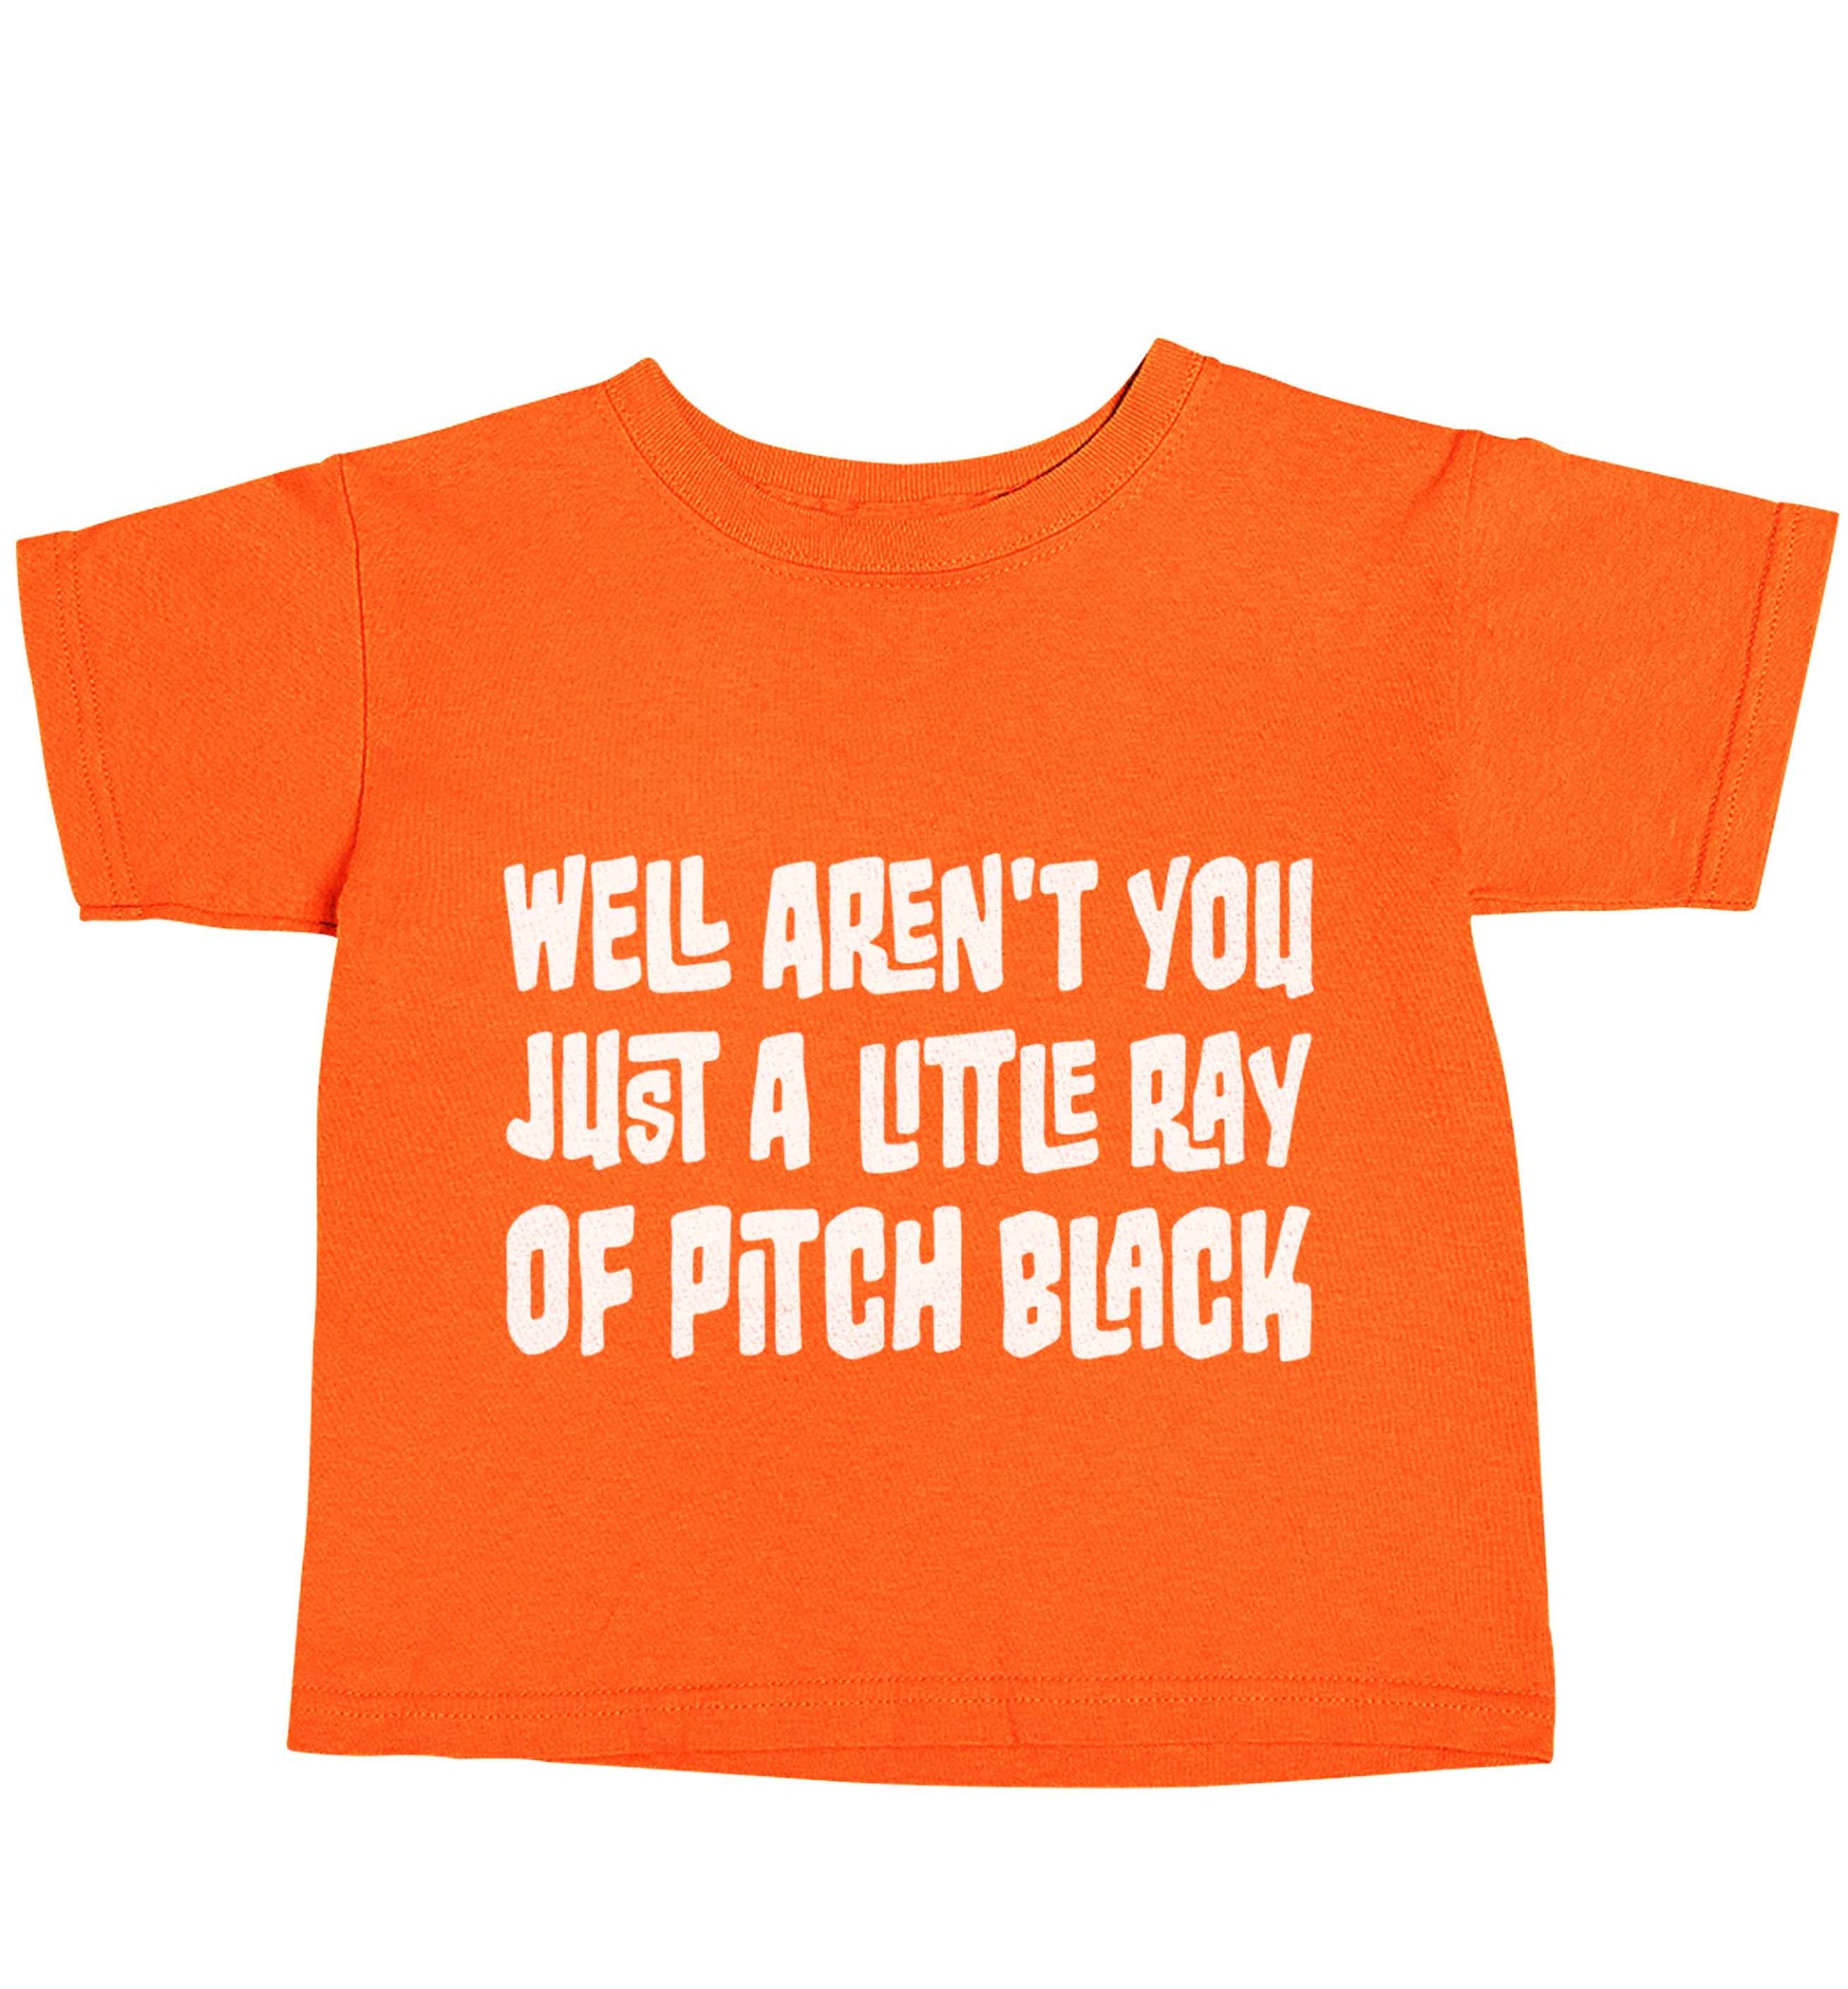 Well aren't you just a little ray of pitch black Kit orange baby toddler Tshirt 2 Years